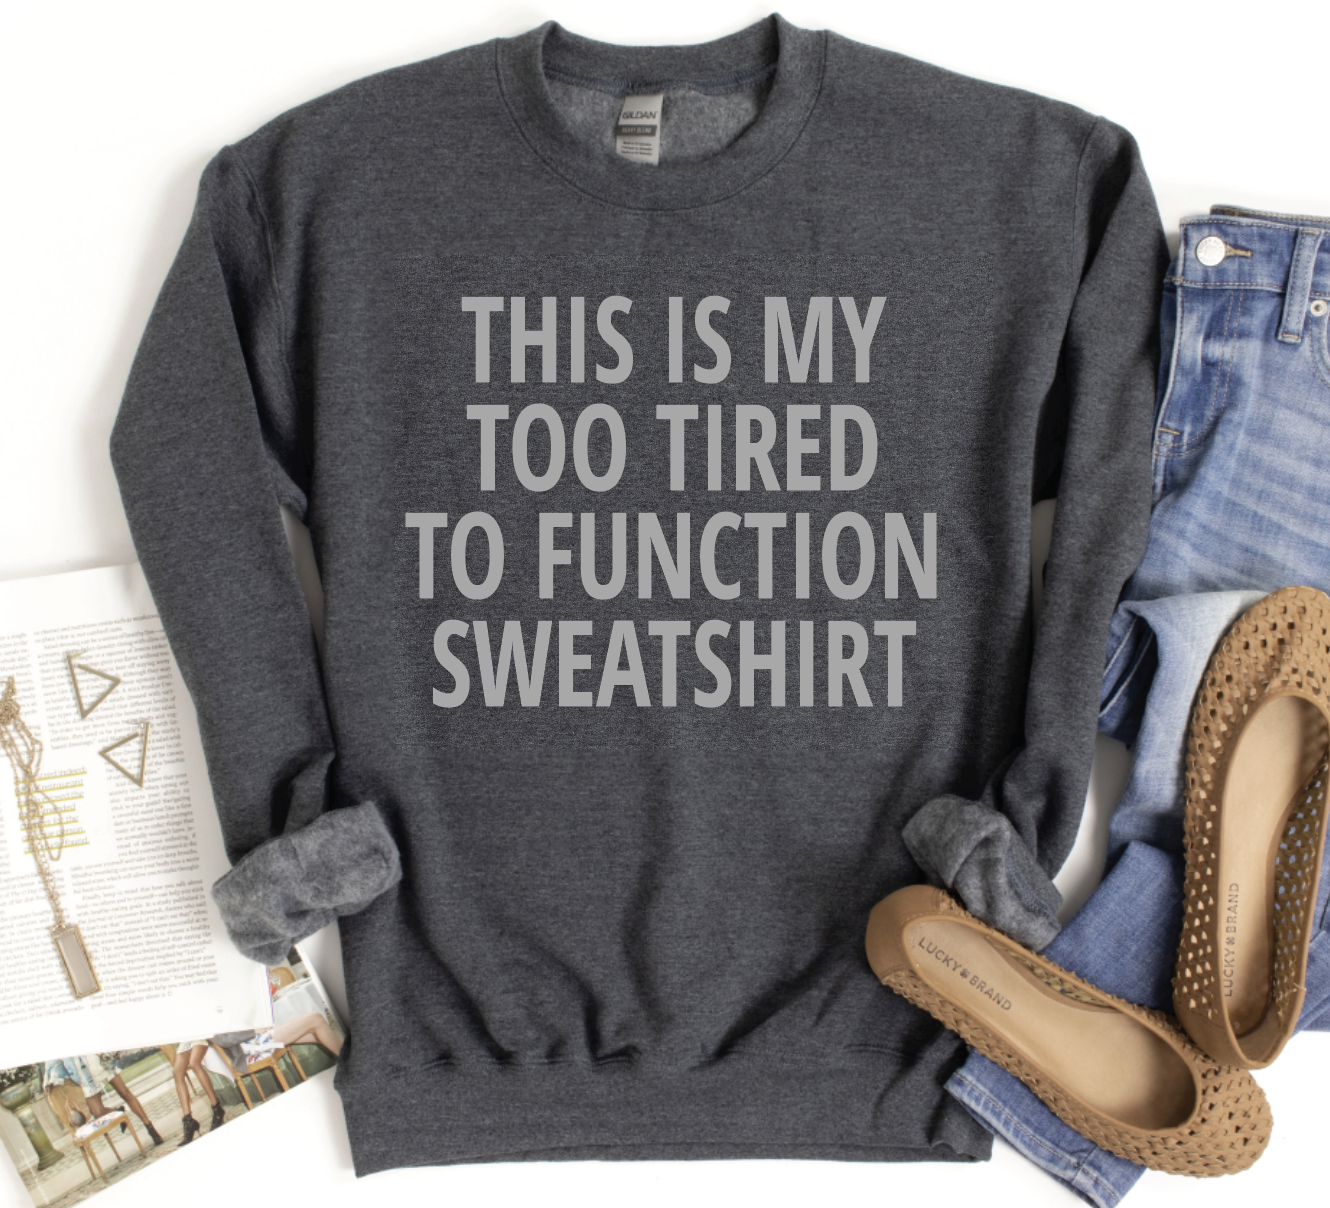 This is my too tired to function sweatshirt preorder